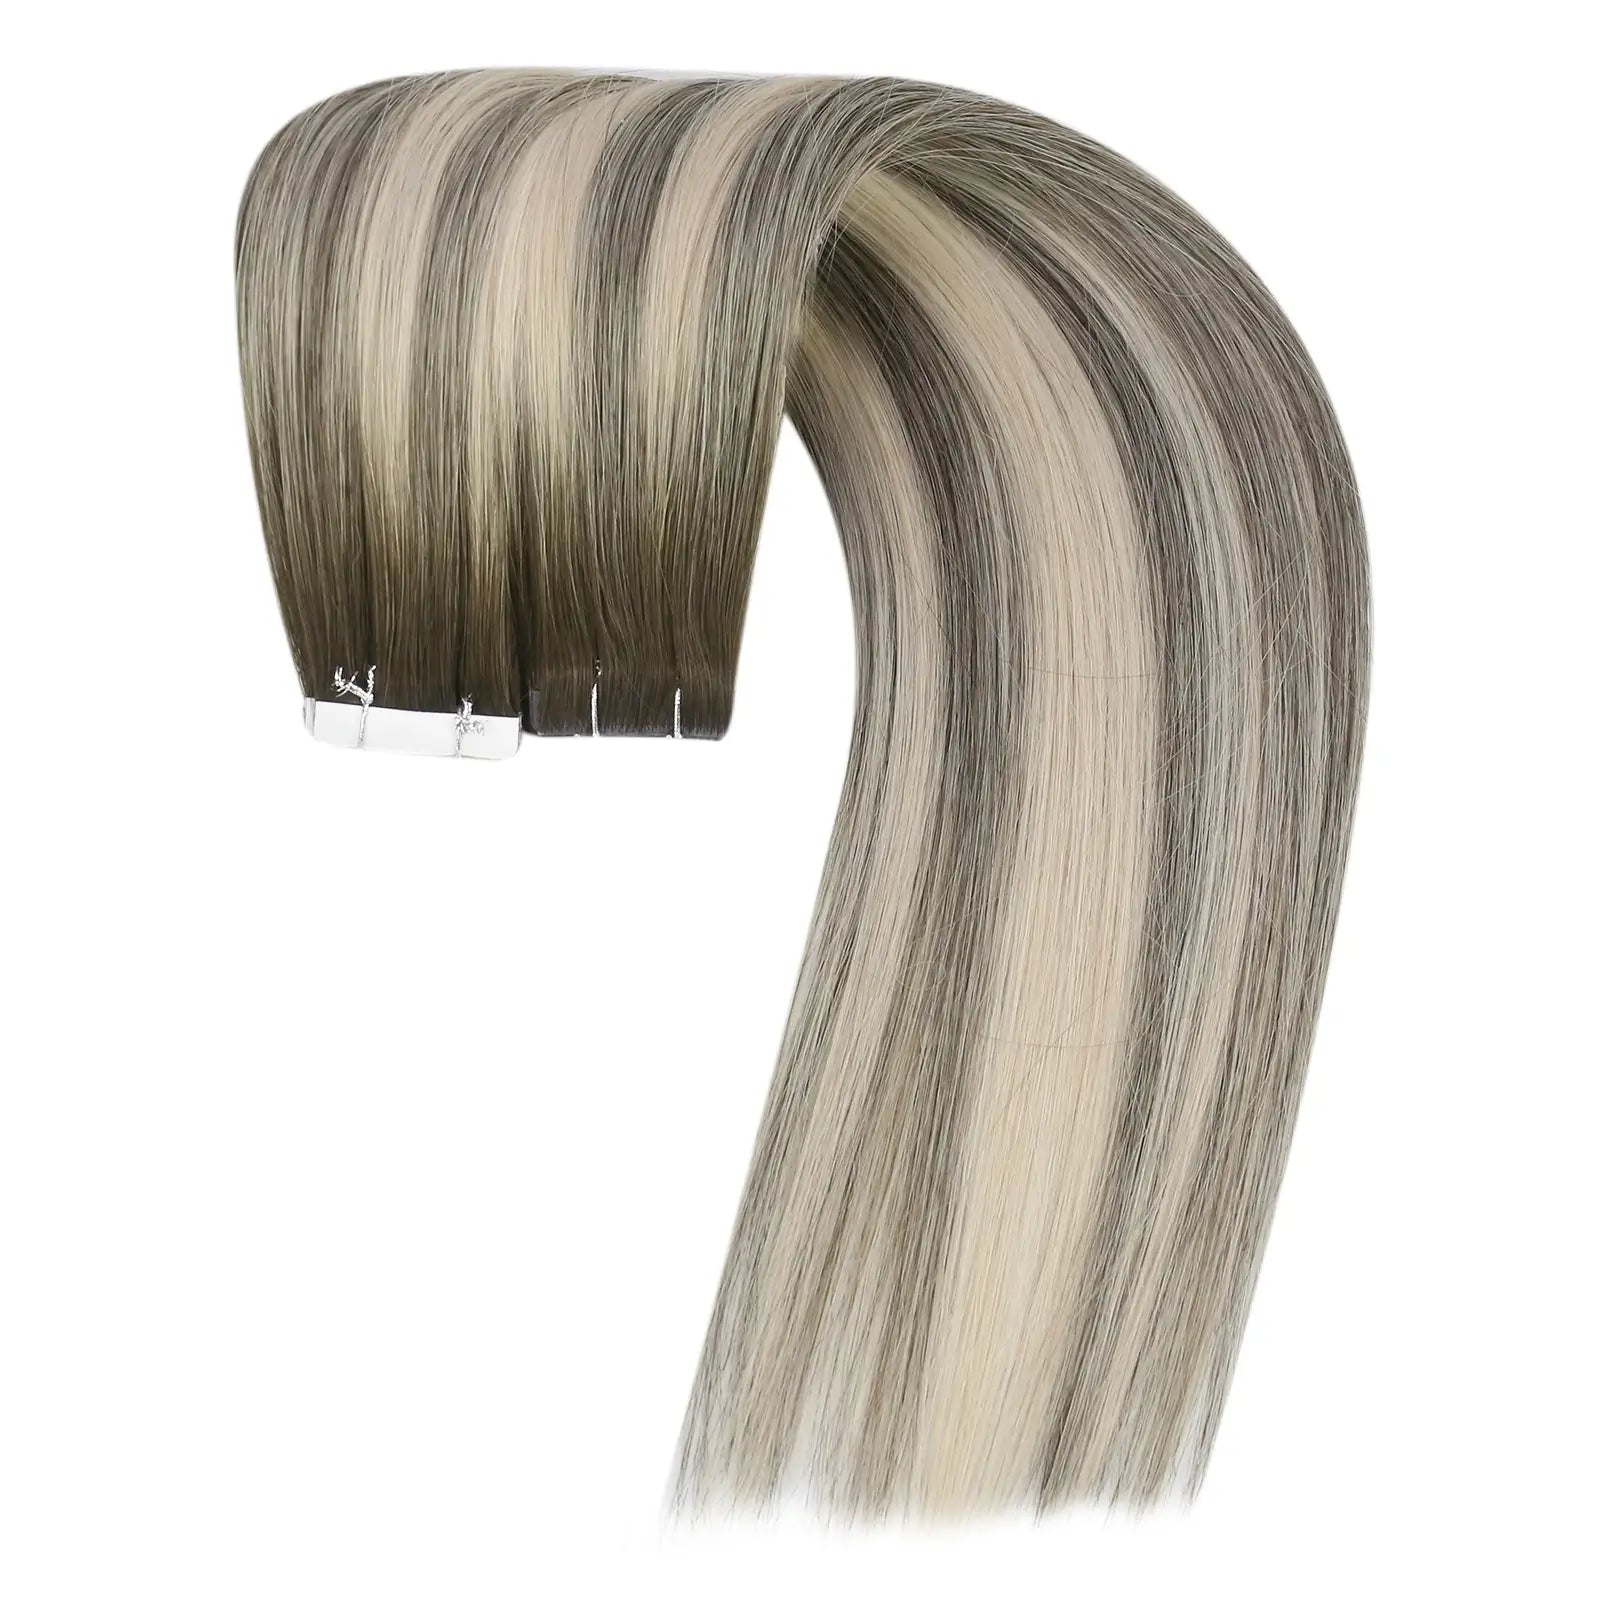 High-quality tape hair extensions that are easy to wear